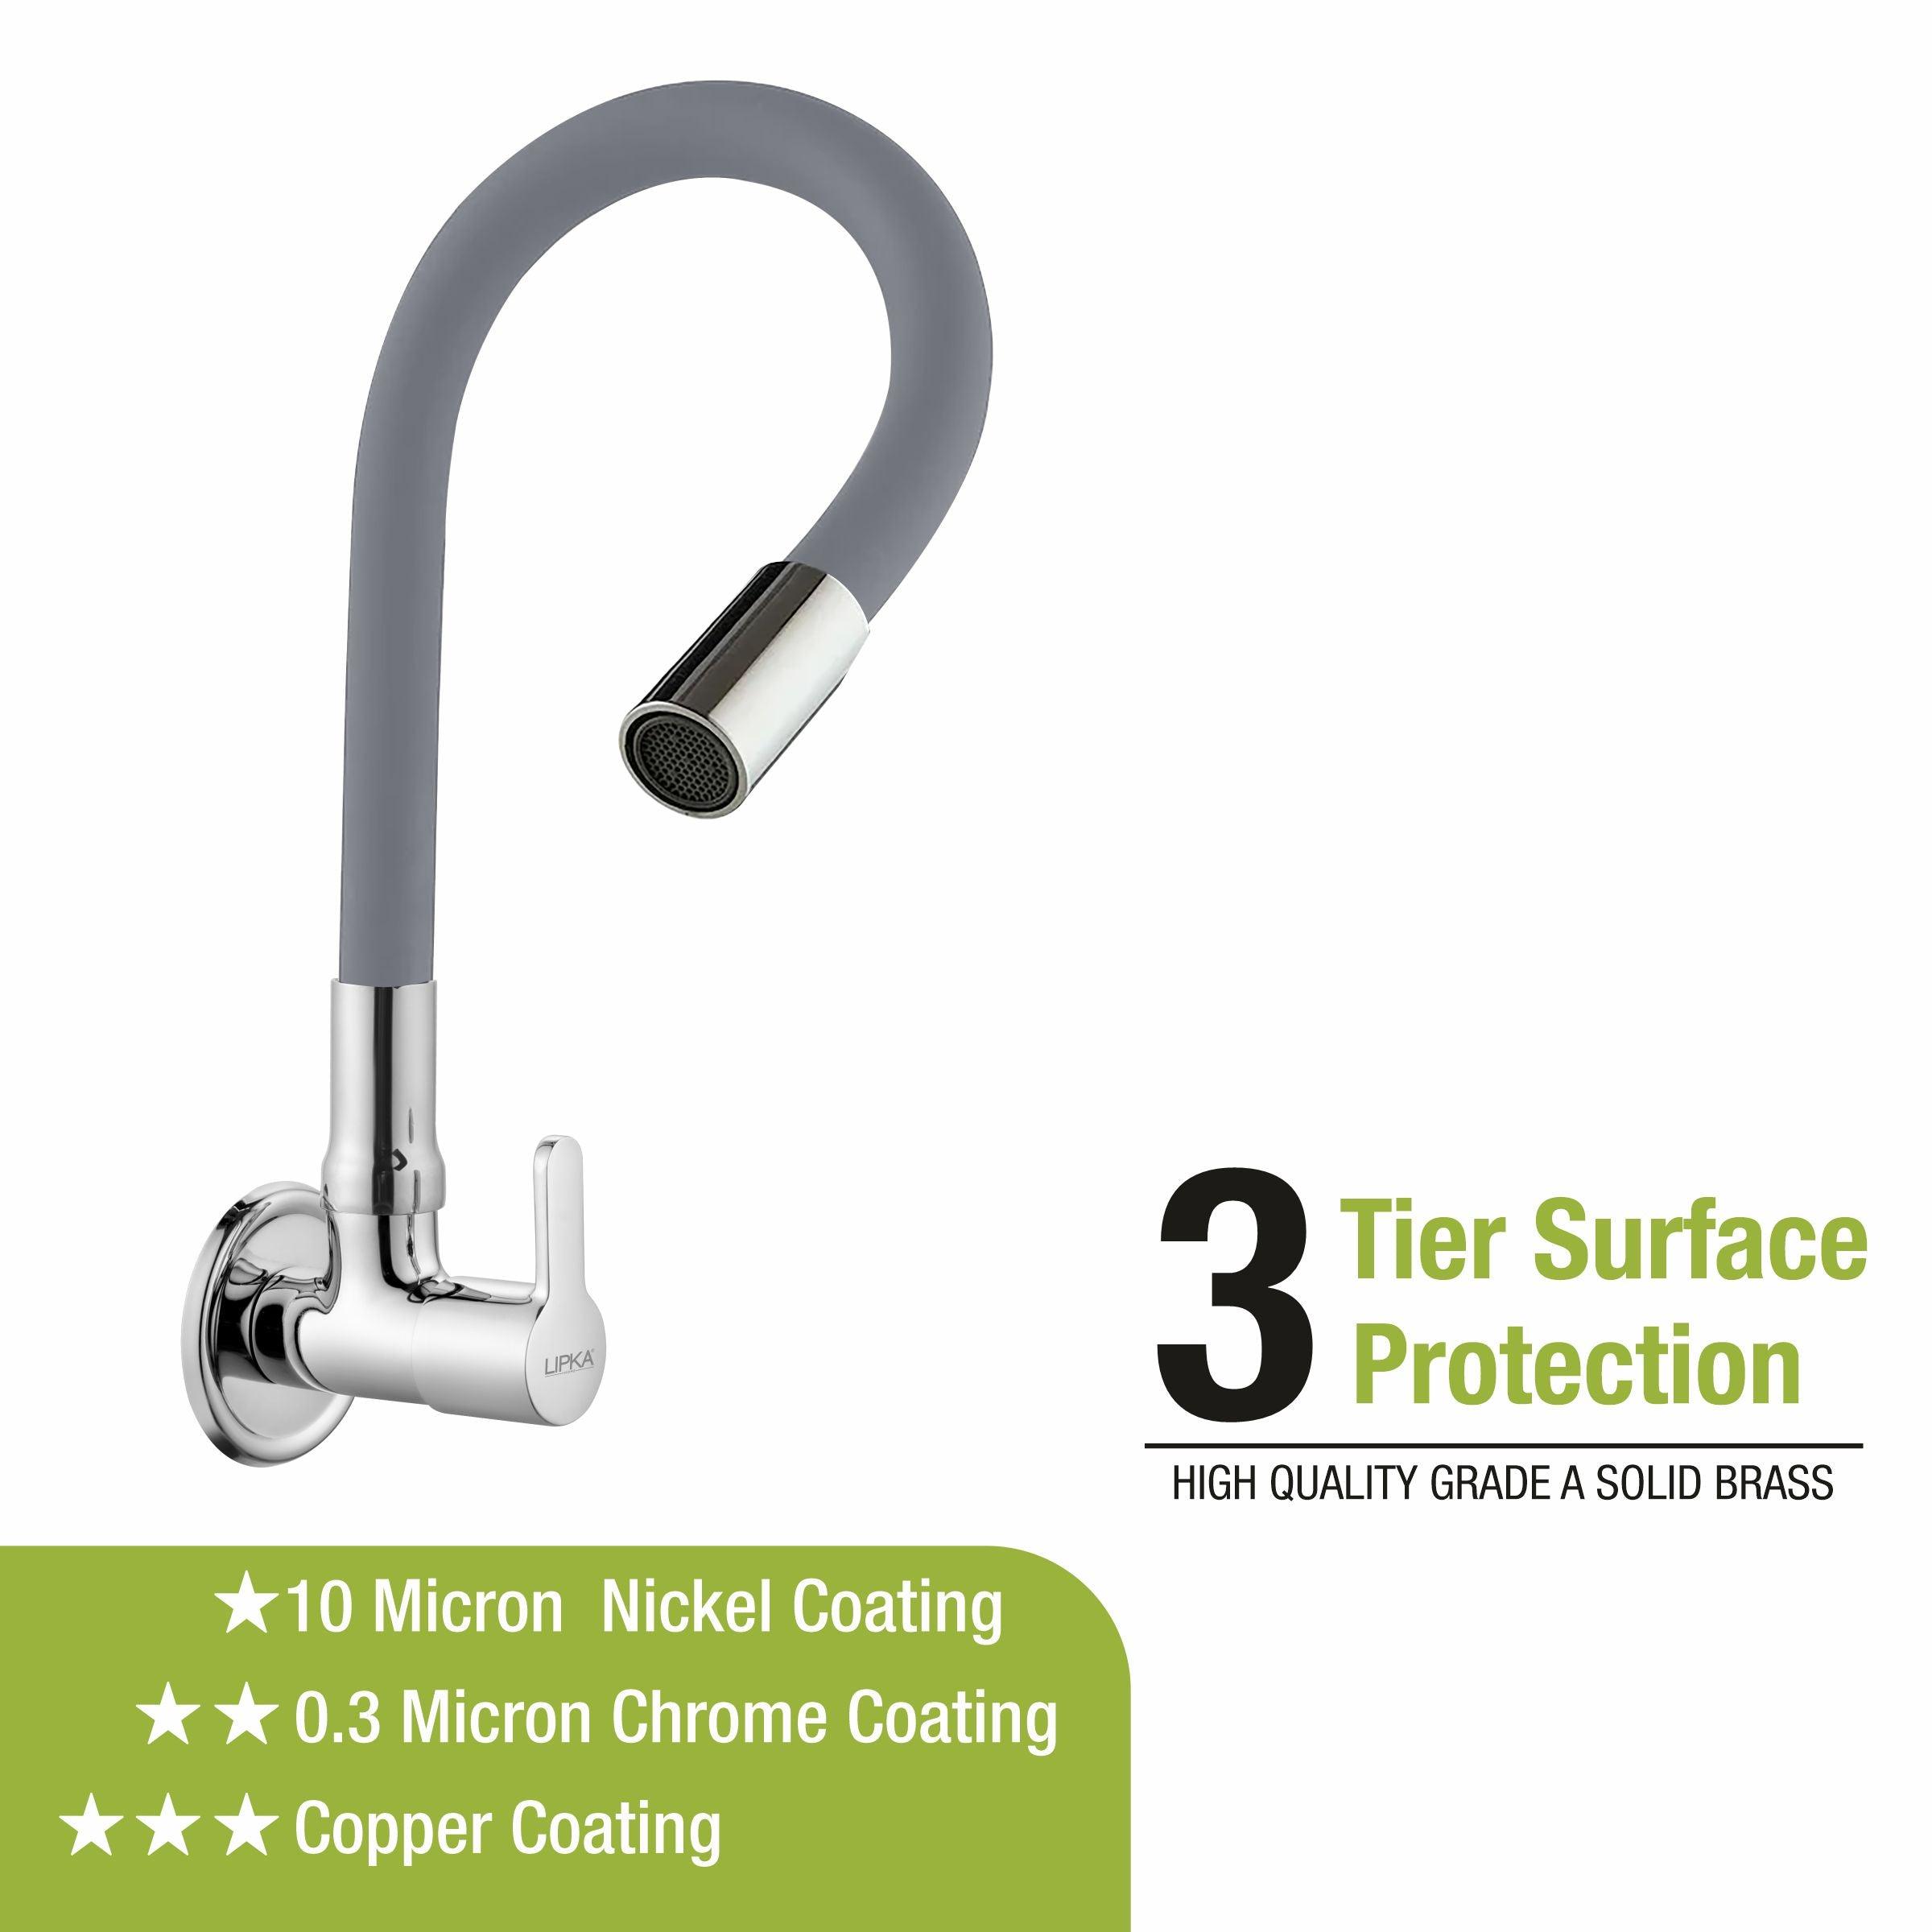 Fusion Sink Tap Brass Faucet with Flexible Silicone Spout (Grey) - LIPKA - Lipka Home